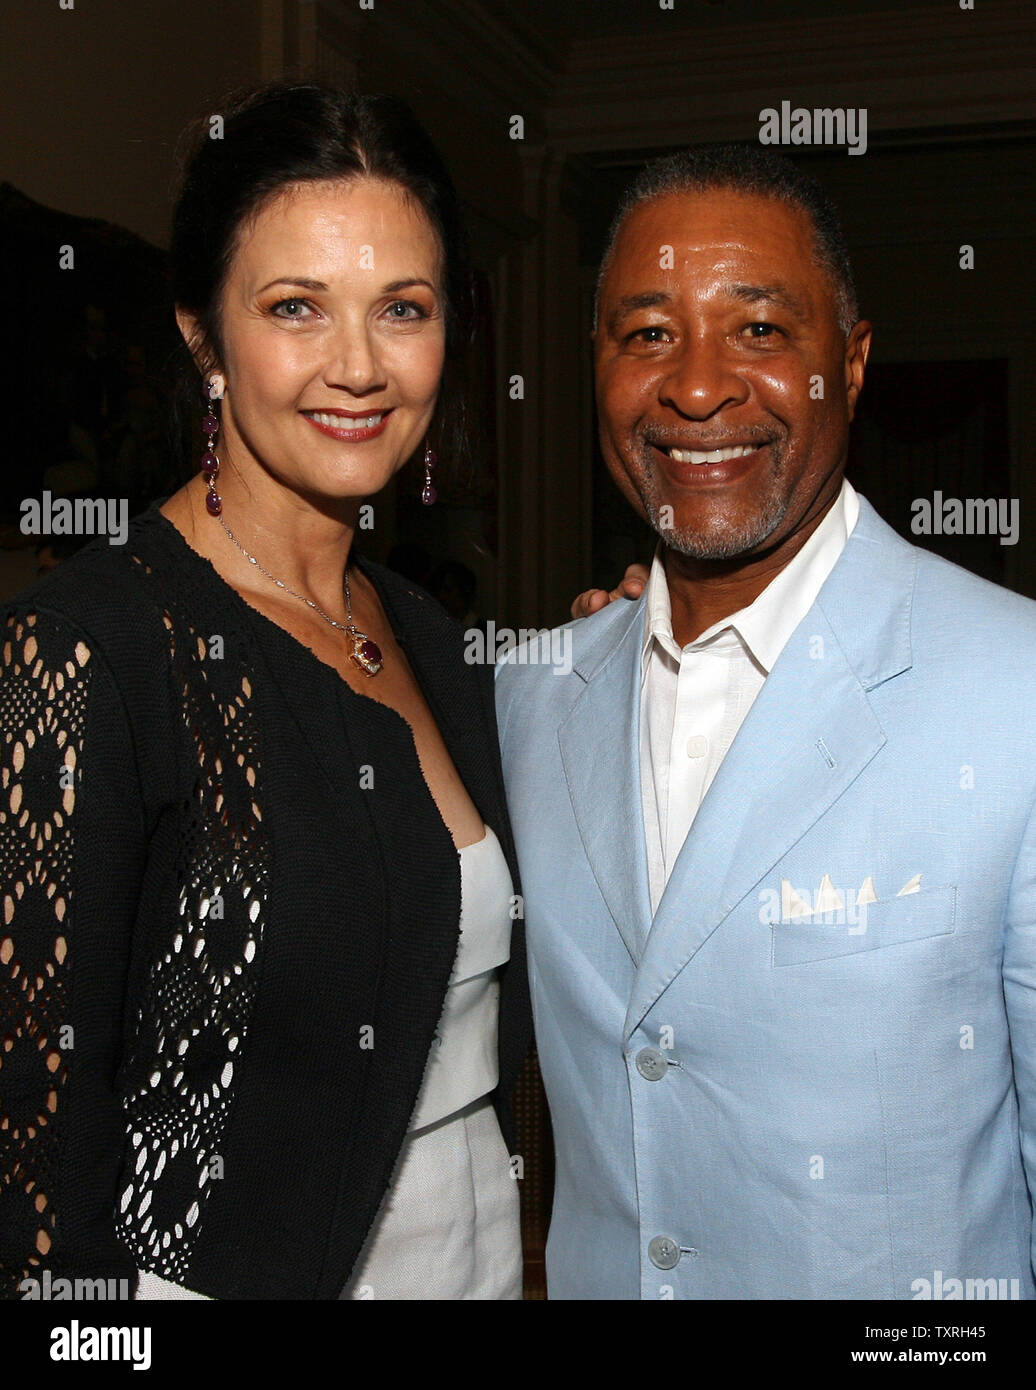 National Baseball Hall of Fame member Ozzie Smith and actress Linda Carter  pose for a photograph during a party for Hall of Fame inductees Cal Ripken  Jr., and Tony Gwynn in Cooperstown